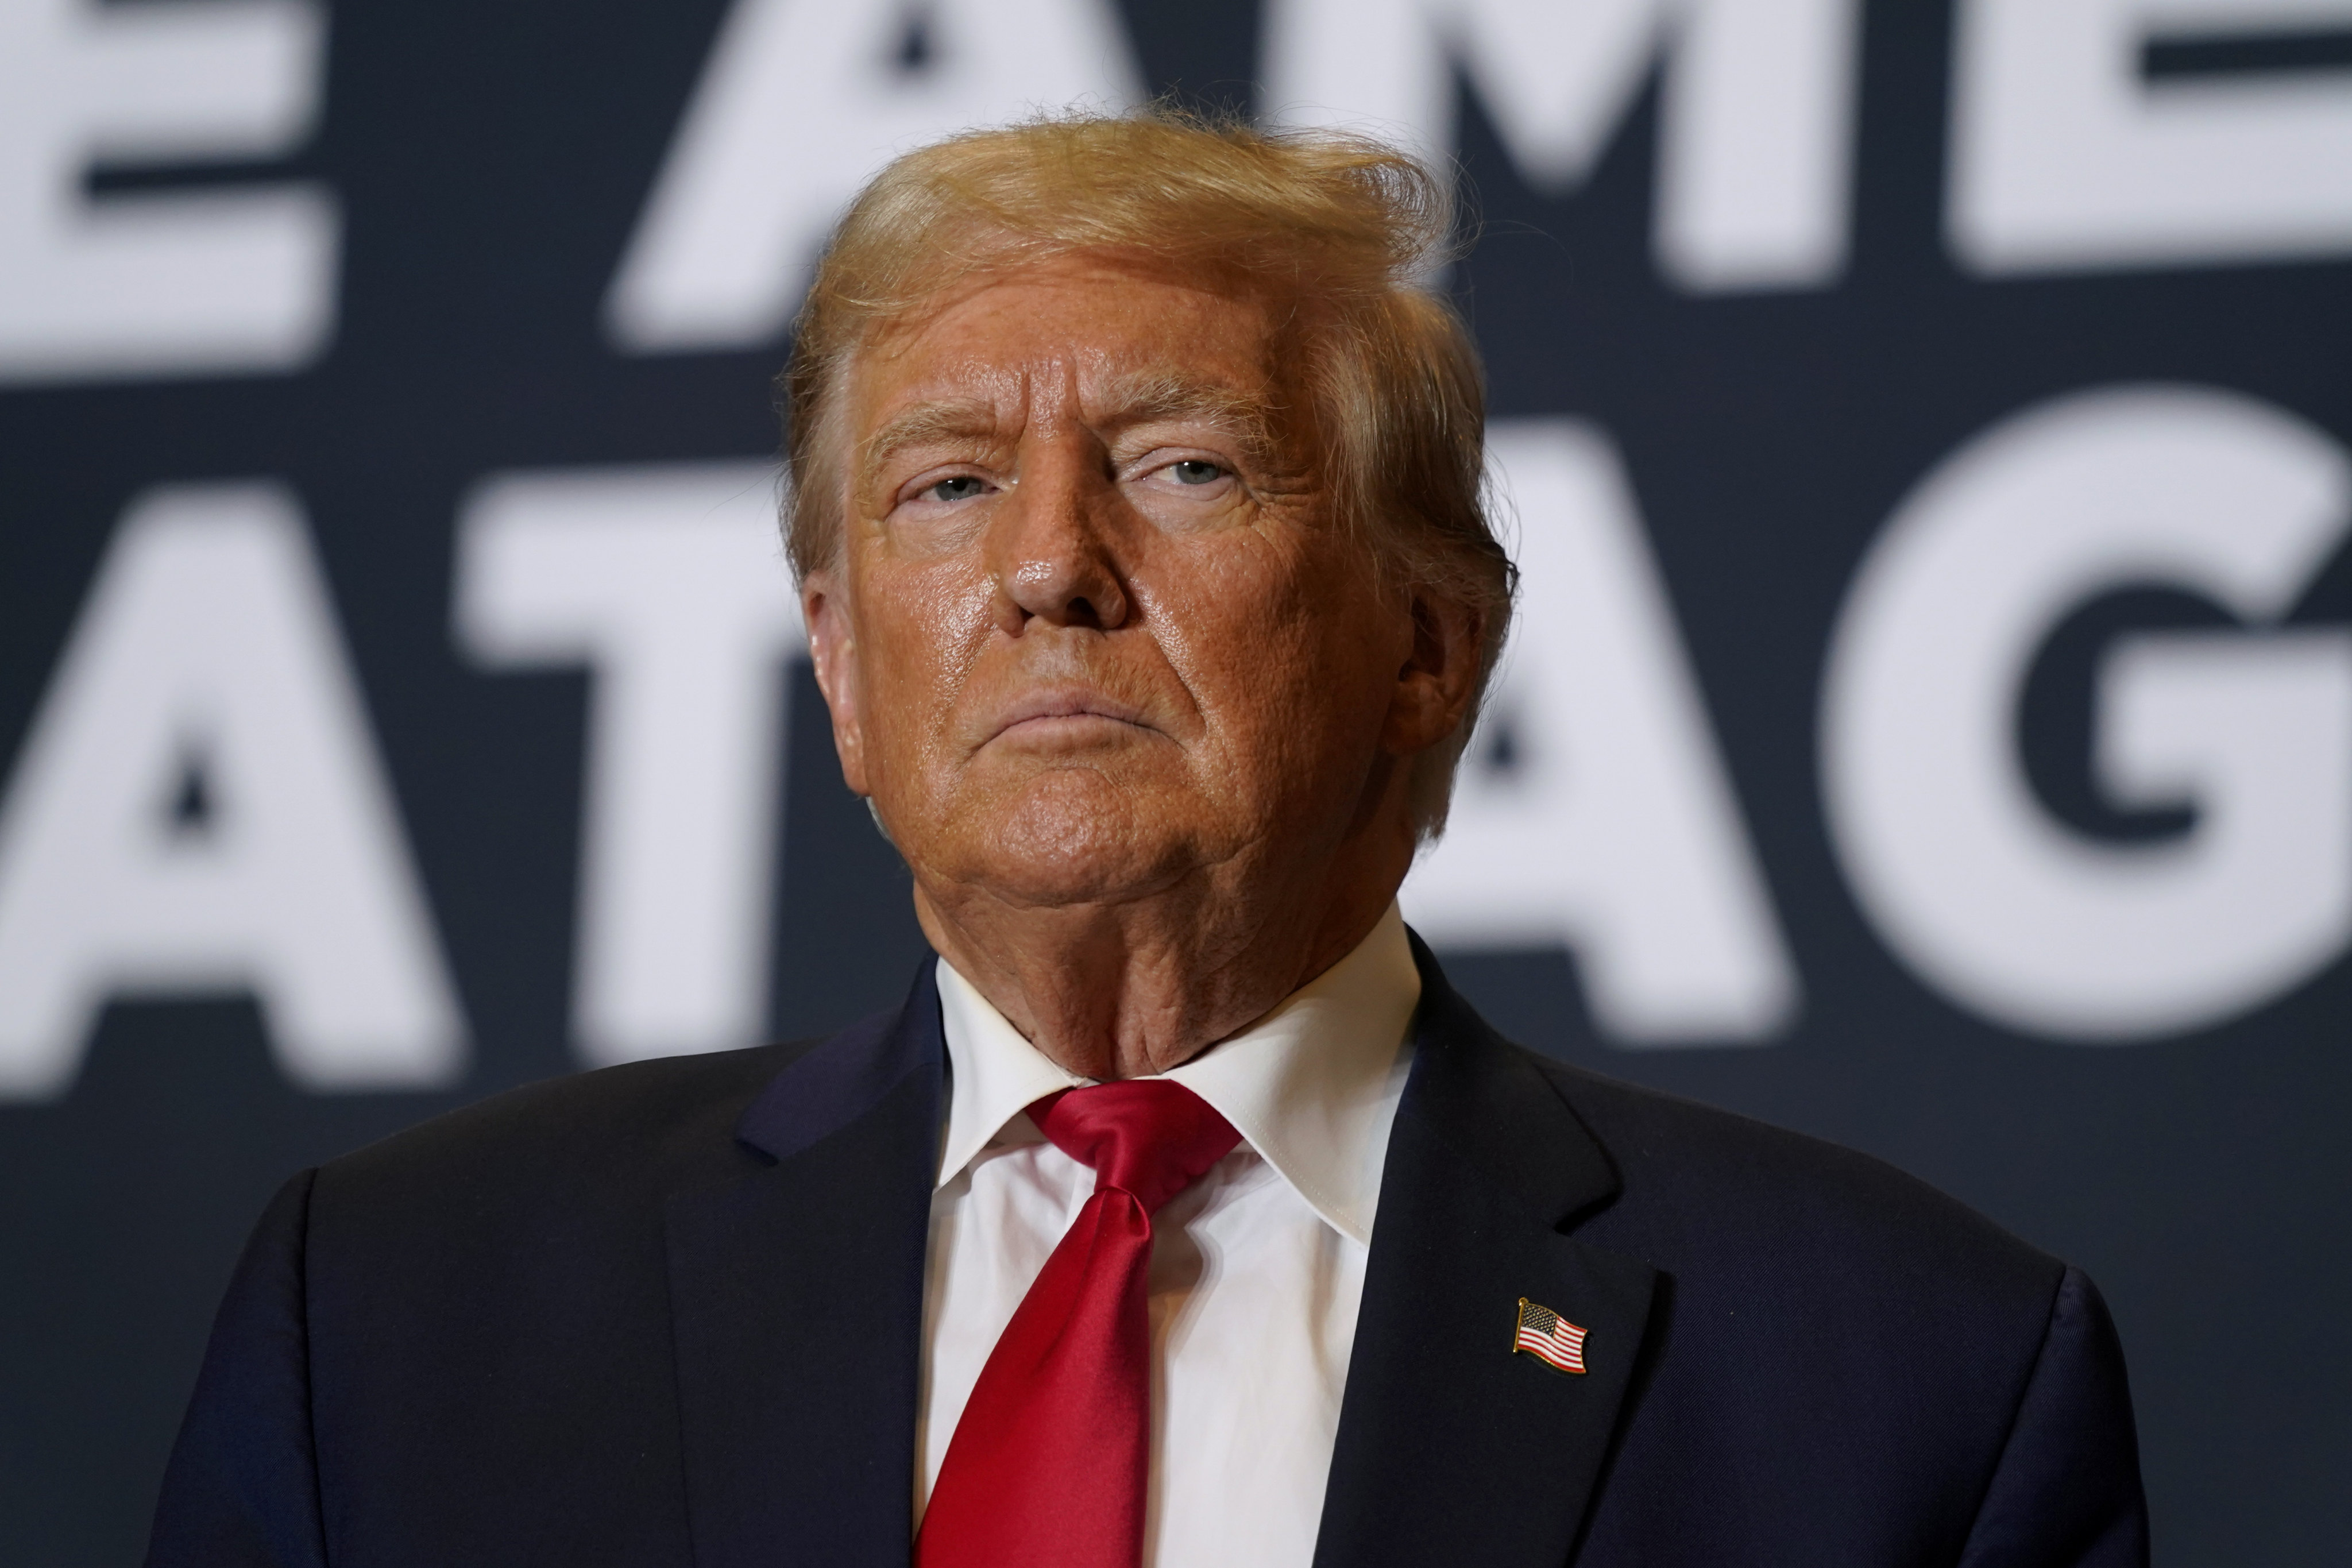  Donald Trump’s lawsuit against a British private investigations firm over a dossier which alleged ties between Trump’s campaign and Russia was thrown out by London’s High Court on Thursday. Photo: AP